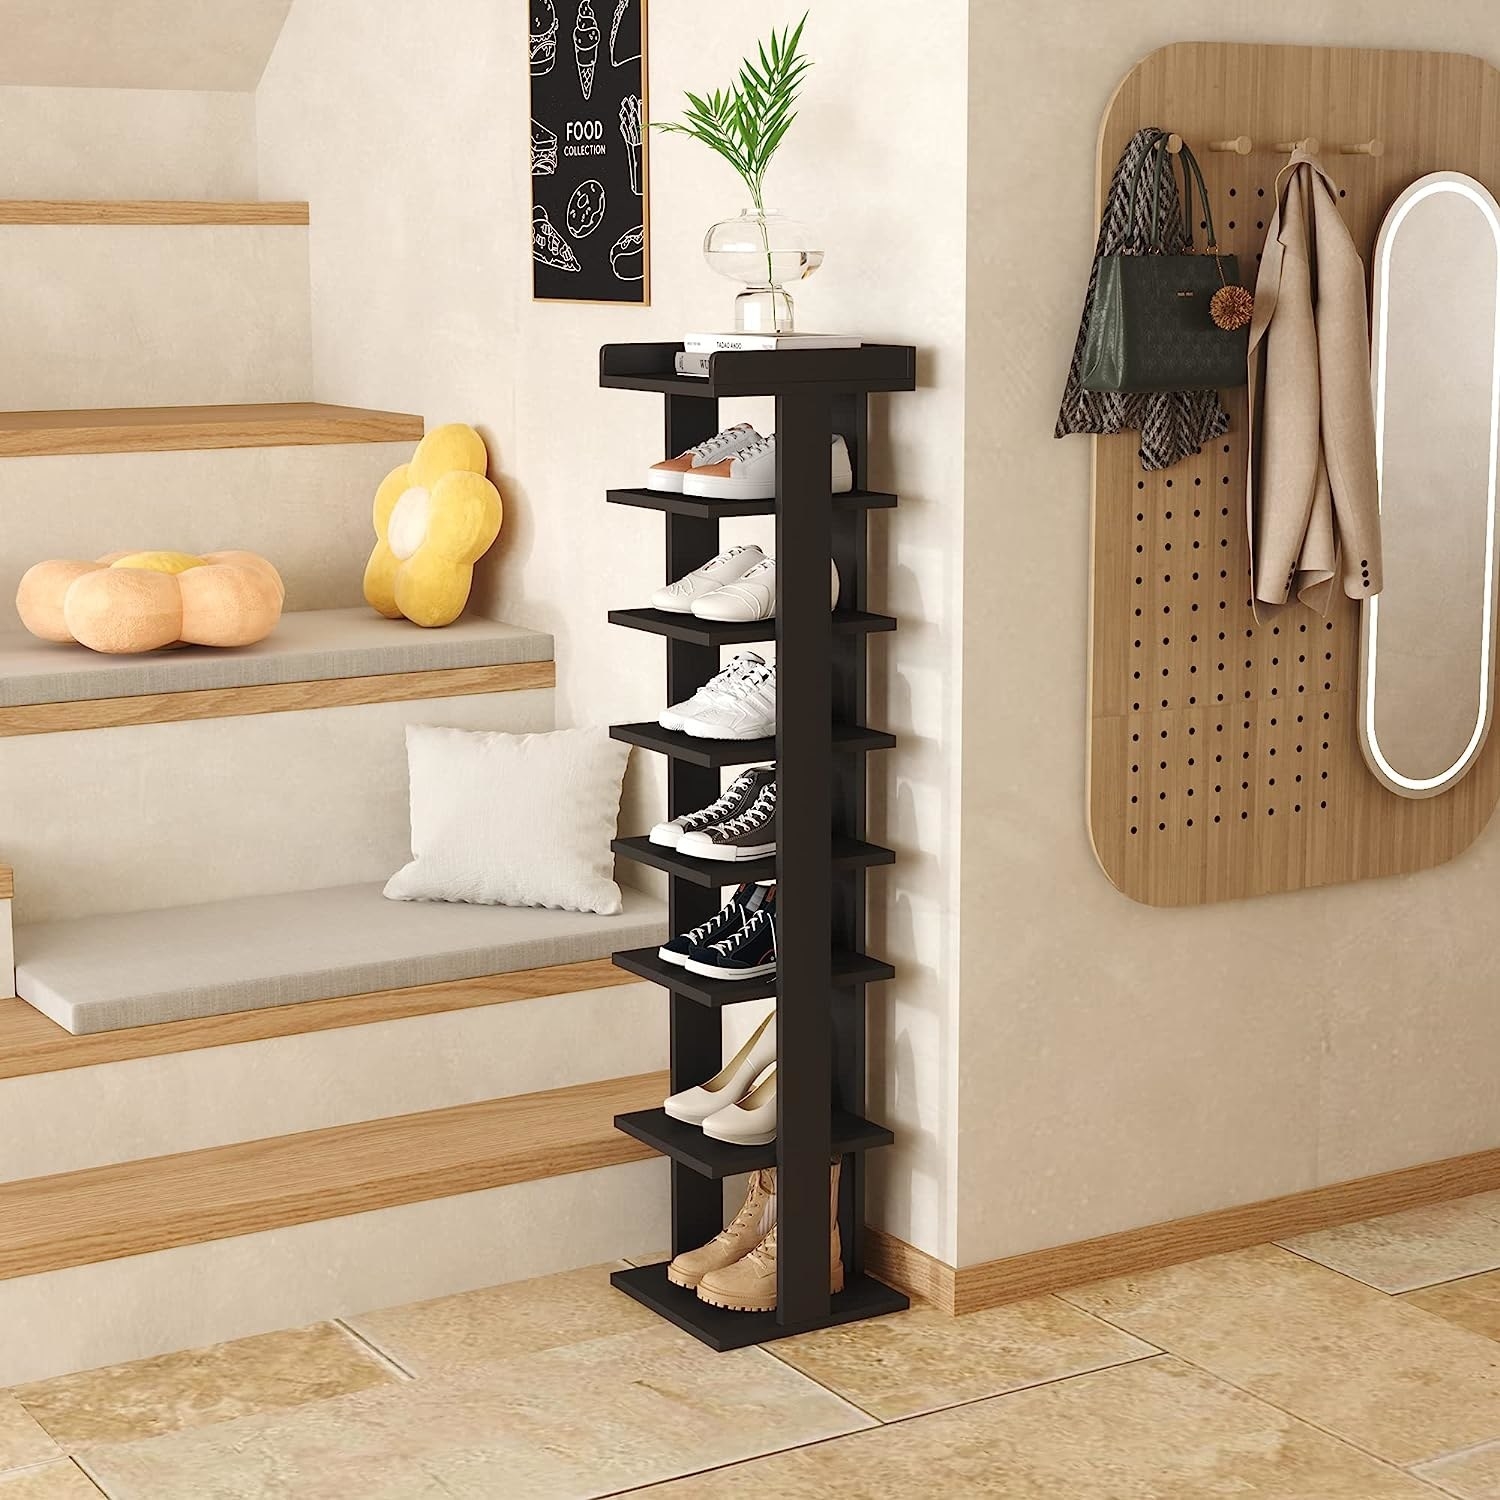 the shoe stand in an entryway